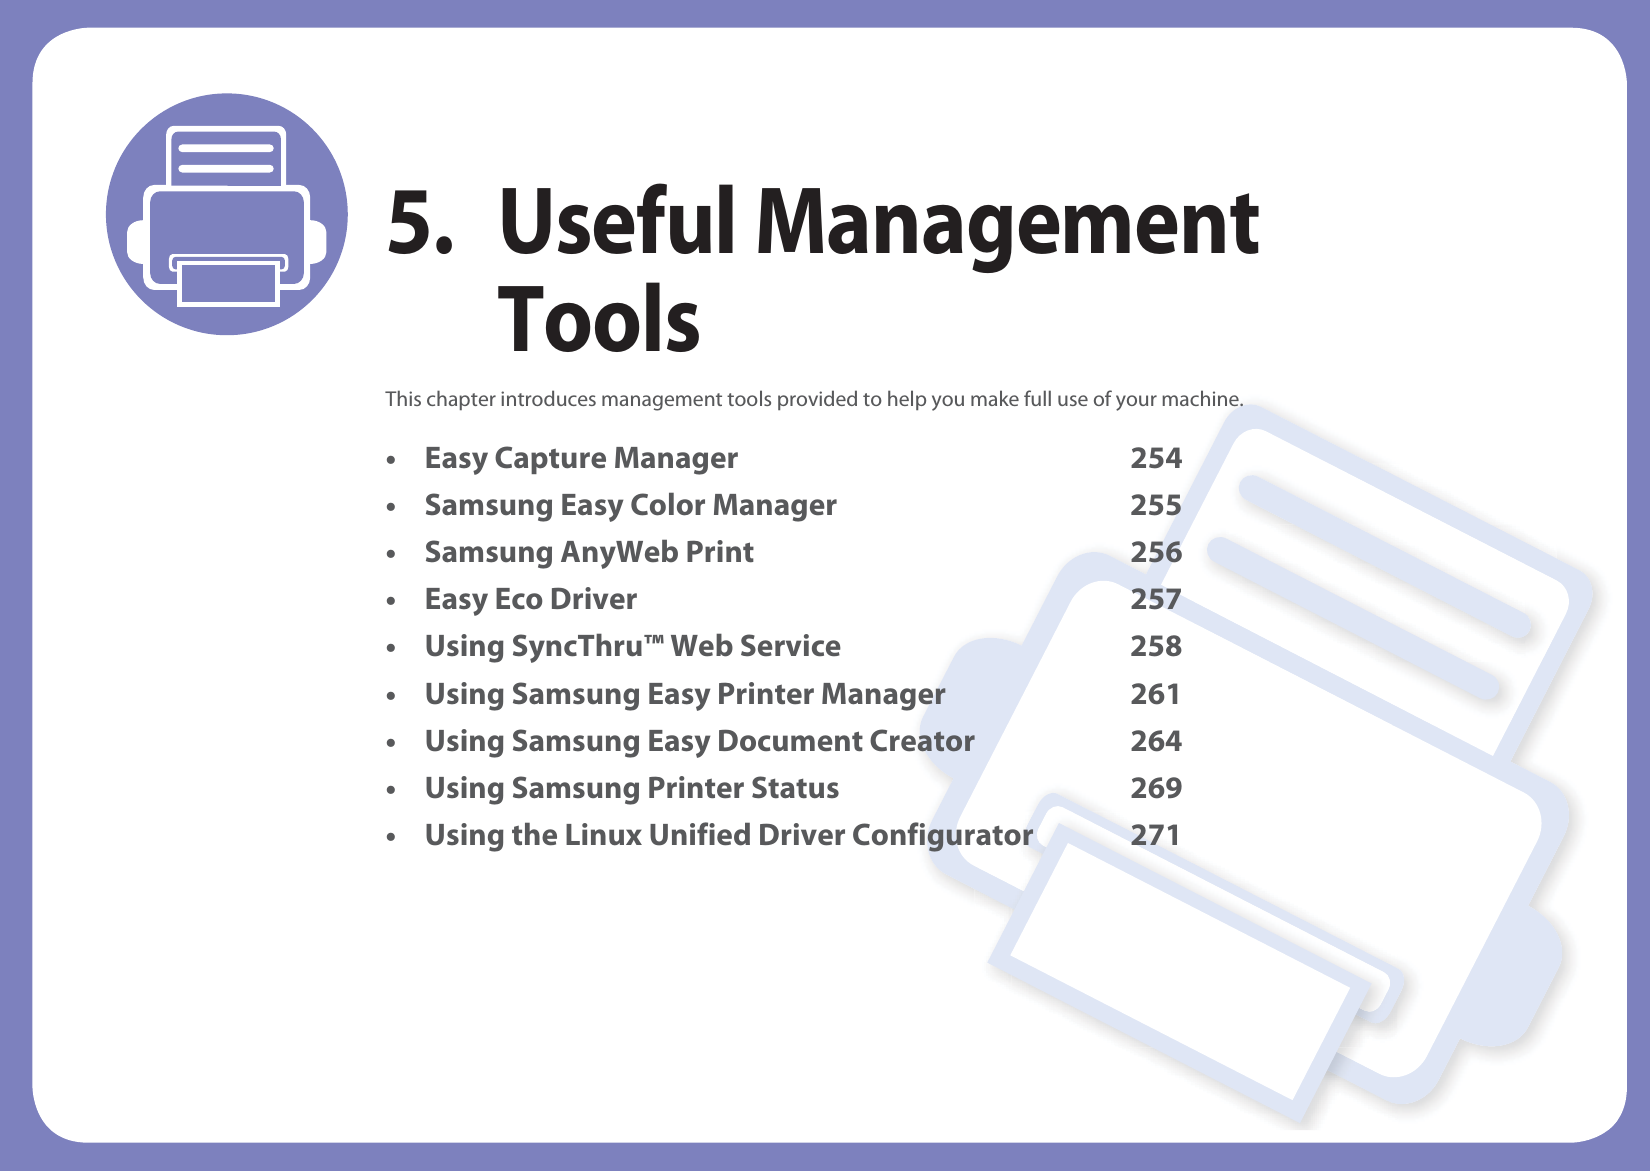 5. Useful Management ToolsThis chapter introduces management tools provided to help you make full use of your machine. • Easy Capture Manager 254• Samsung Easy Color Manager 255• Samsung AnyWeb Print 256• Easy Eco Driver 257• Using SyncThru™ Web Service 258• Using Samsung Easy Printer Manager 261• Using Samsung Easy Document Creator 264• Using Samsung Printer Status 269• Using the Linux Unified Driver Configurator 271